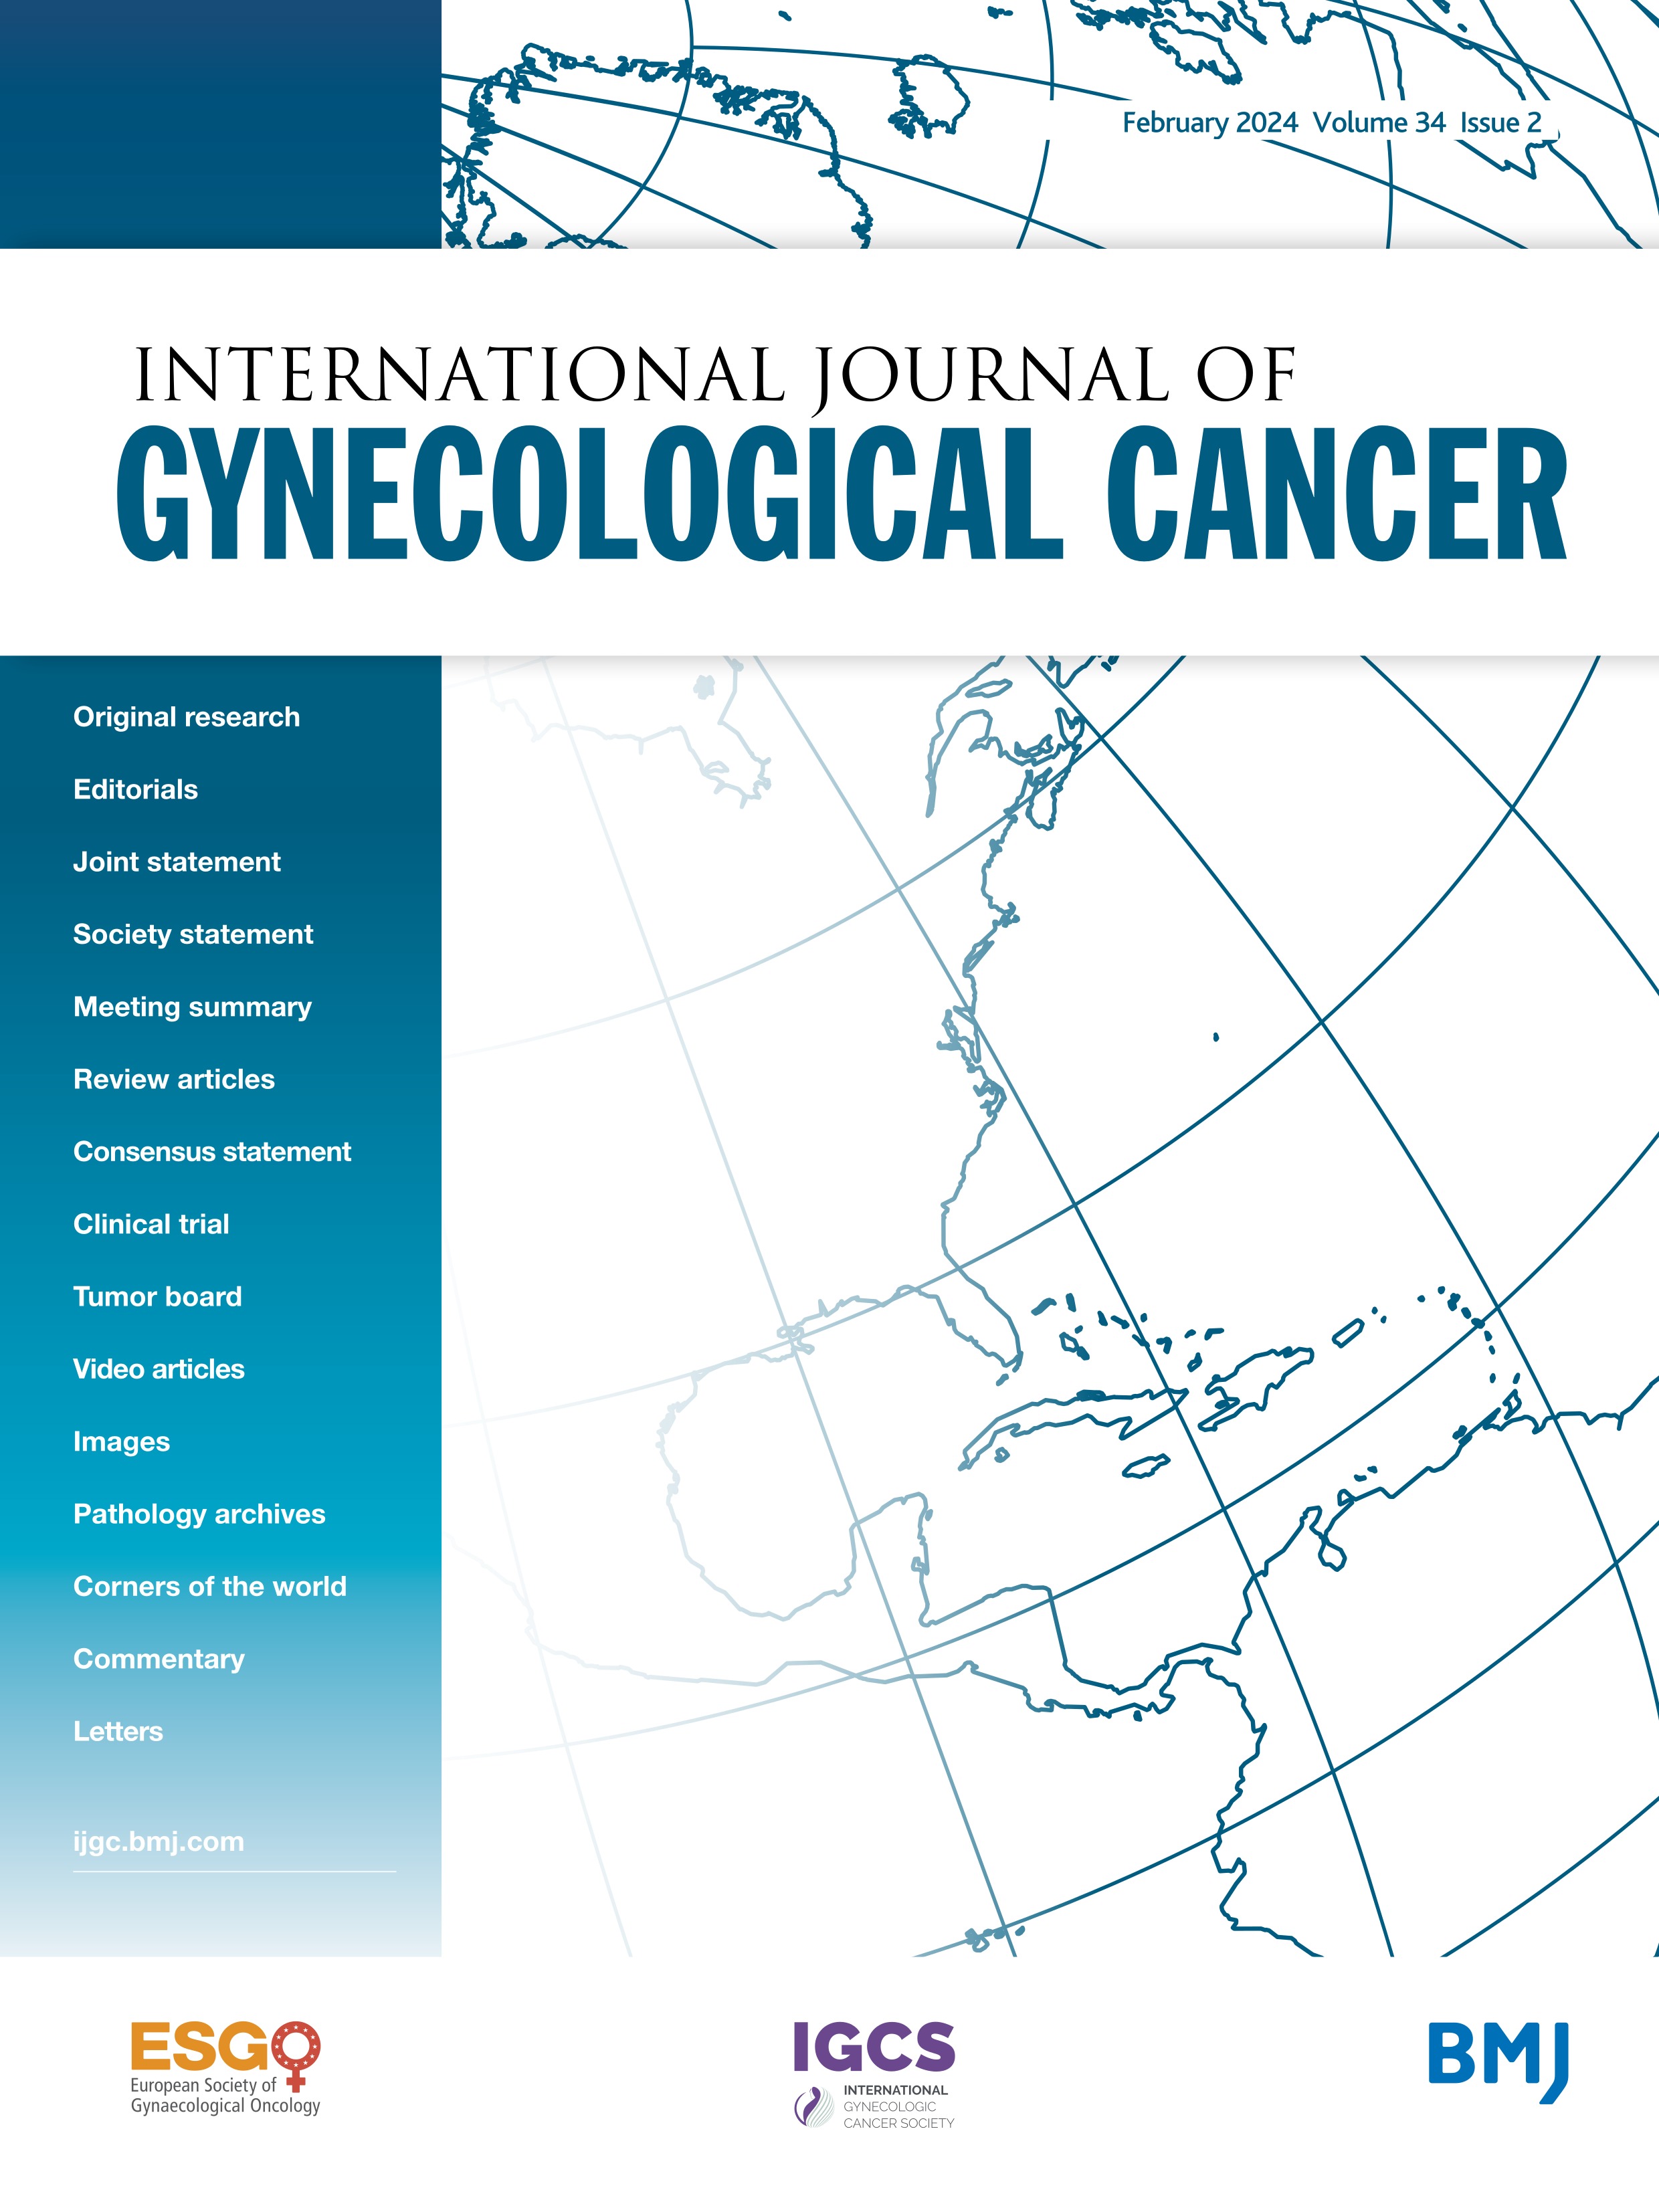 Secondary cytoreduction surgery for recurrent epithelial ovarian cancer patients after PARPi maintenance: A multicenter, randomized, controlled clinical trial